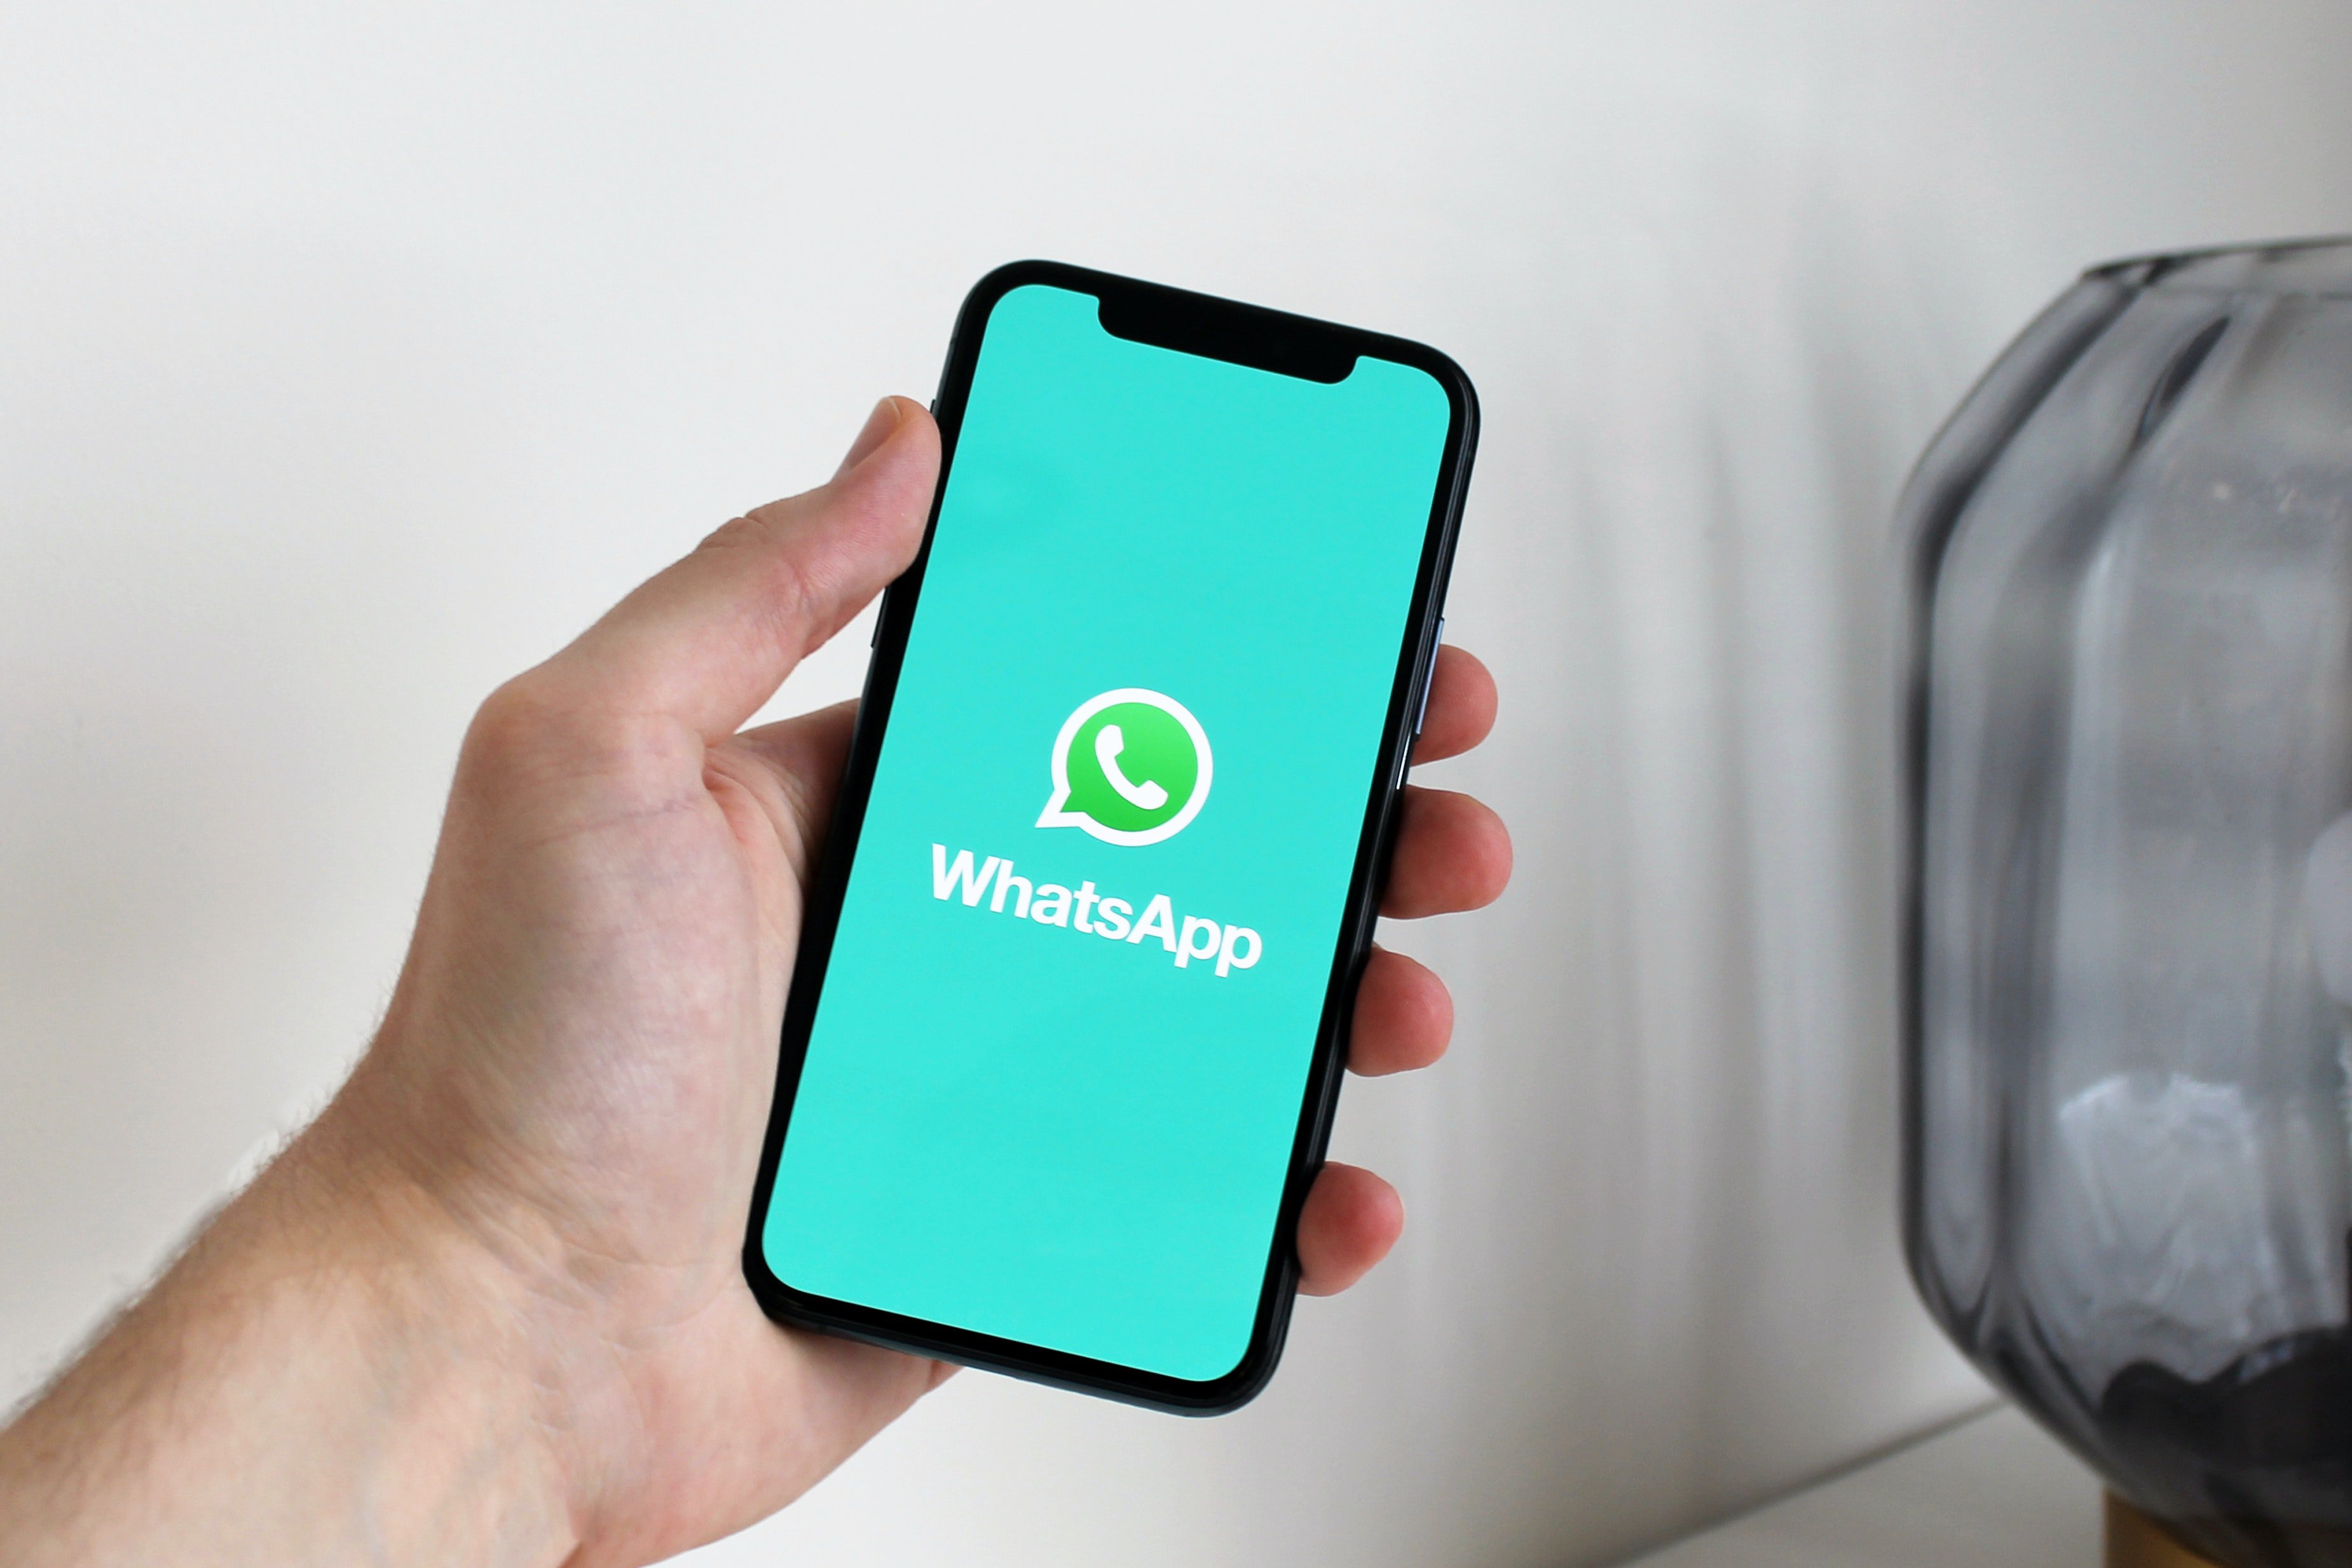 WhatsApp faces second inquiry in Turkey over new privacy policy